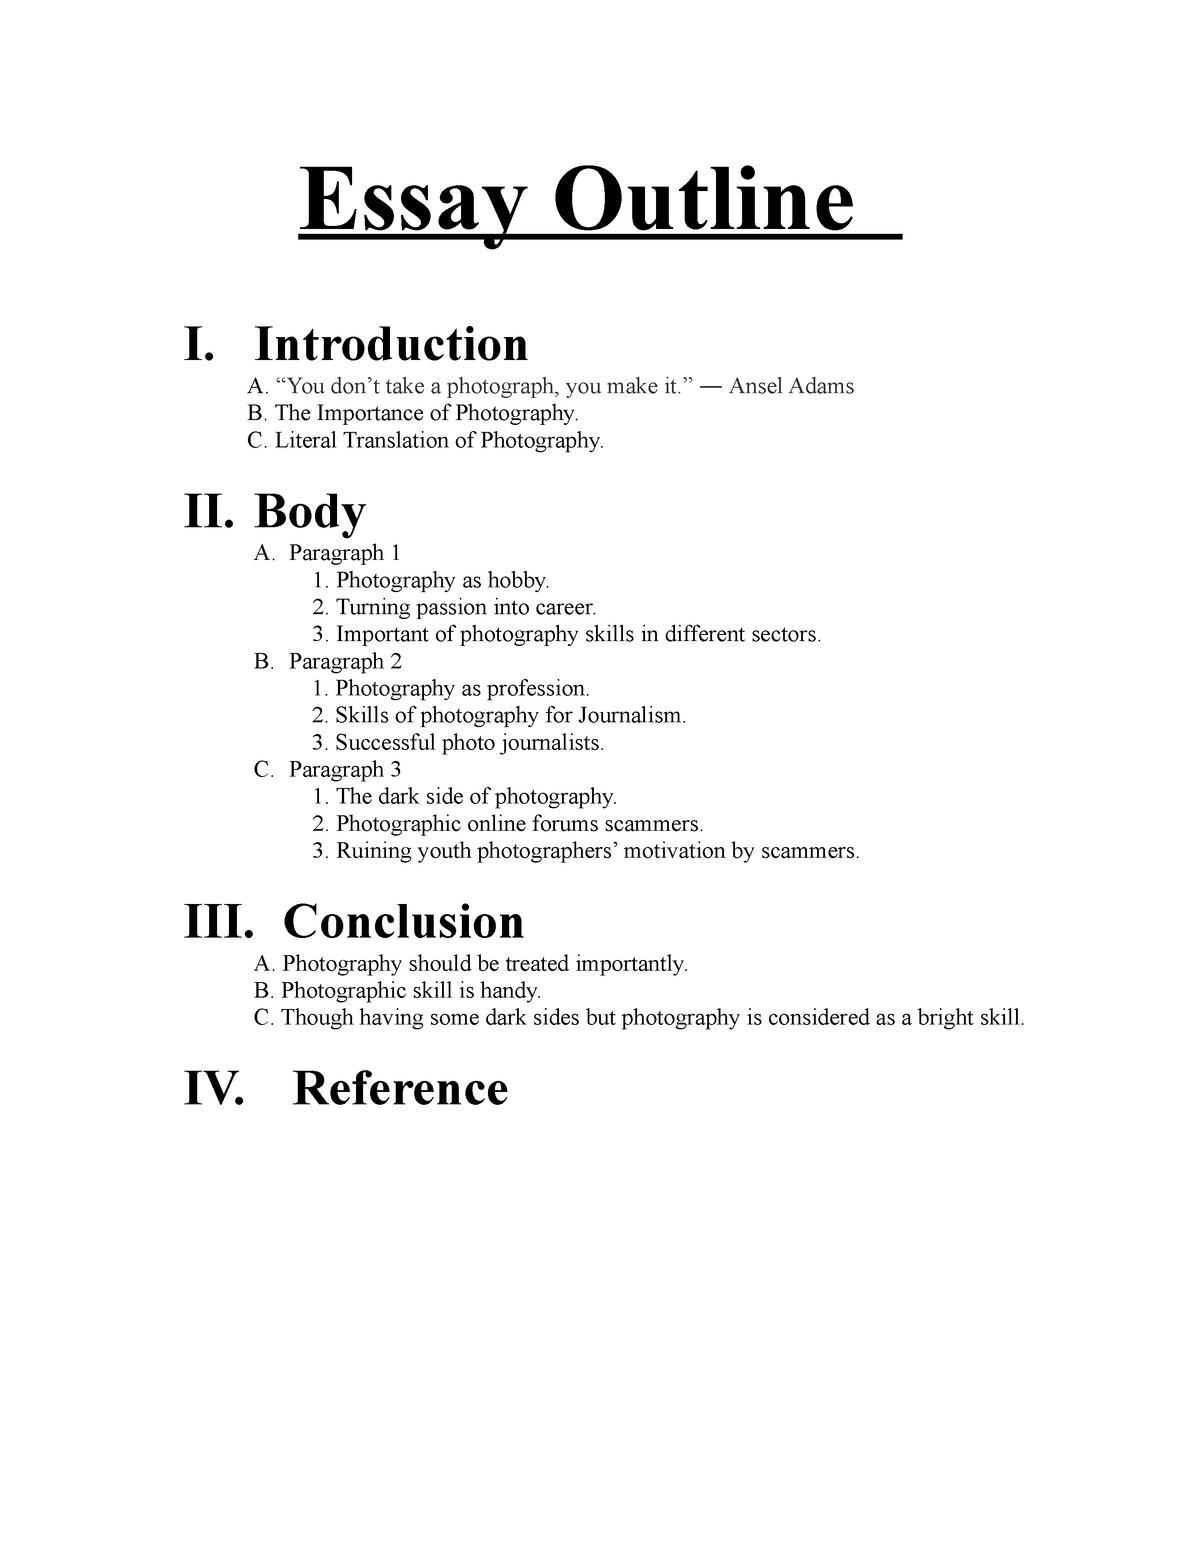 introduction in essay outline